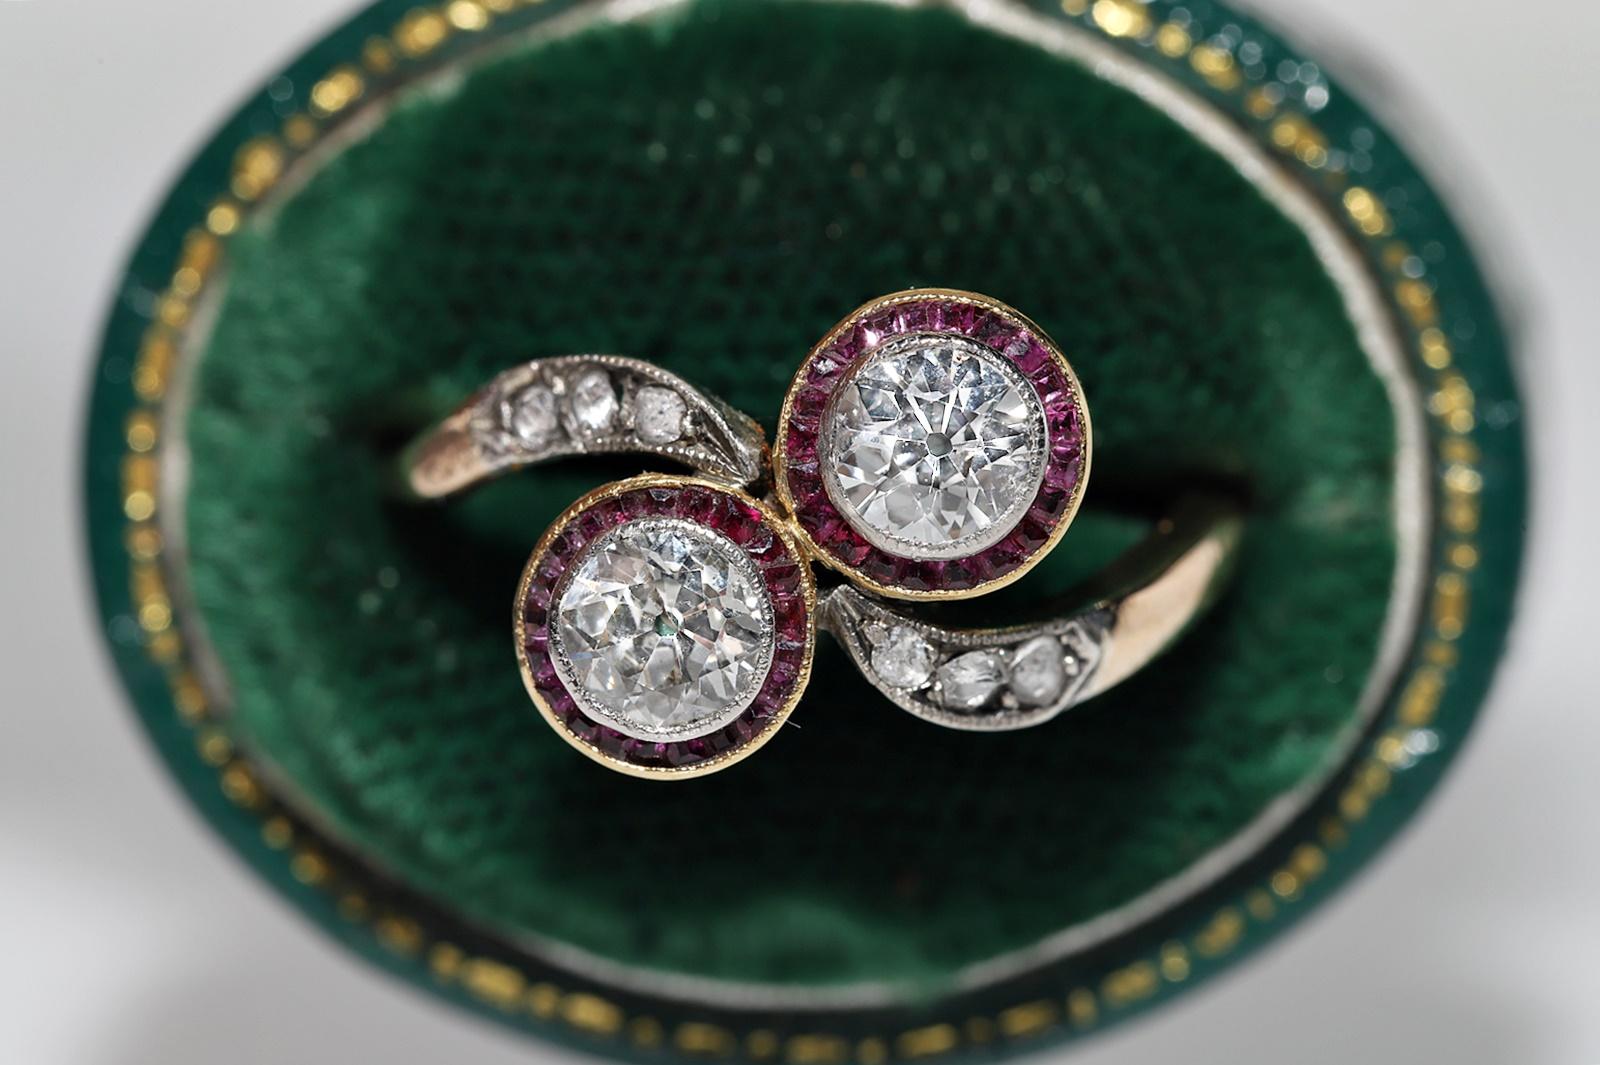 In very good condition.
Total weight 2.9 grams.
Totally is main diamond 0.75 ct.
Totally is side rose cut diamond 0.12 ct.
The diamond is has G color and vvs-vs-s1 clarity.
Totally is caliber cut ruby 0.75 ct.
Ring size is US 6 (We can make any